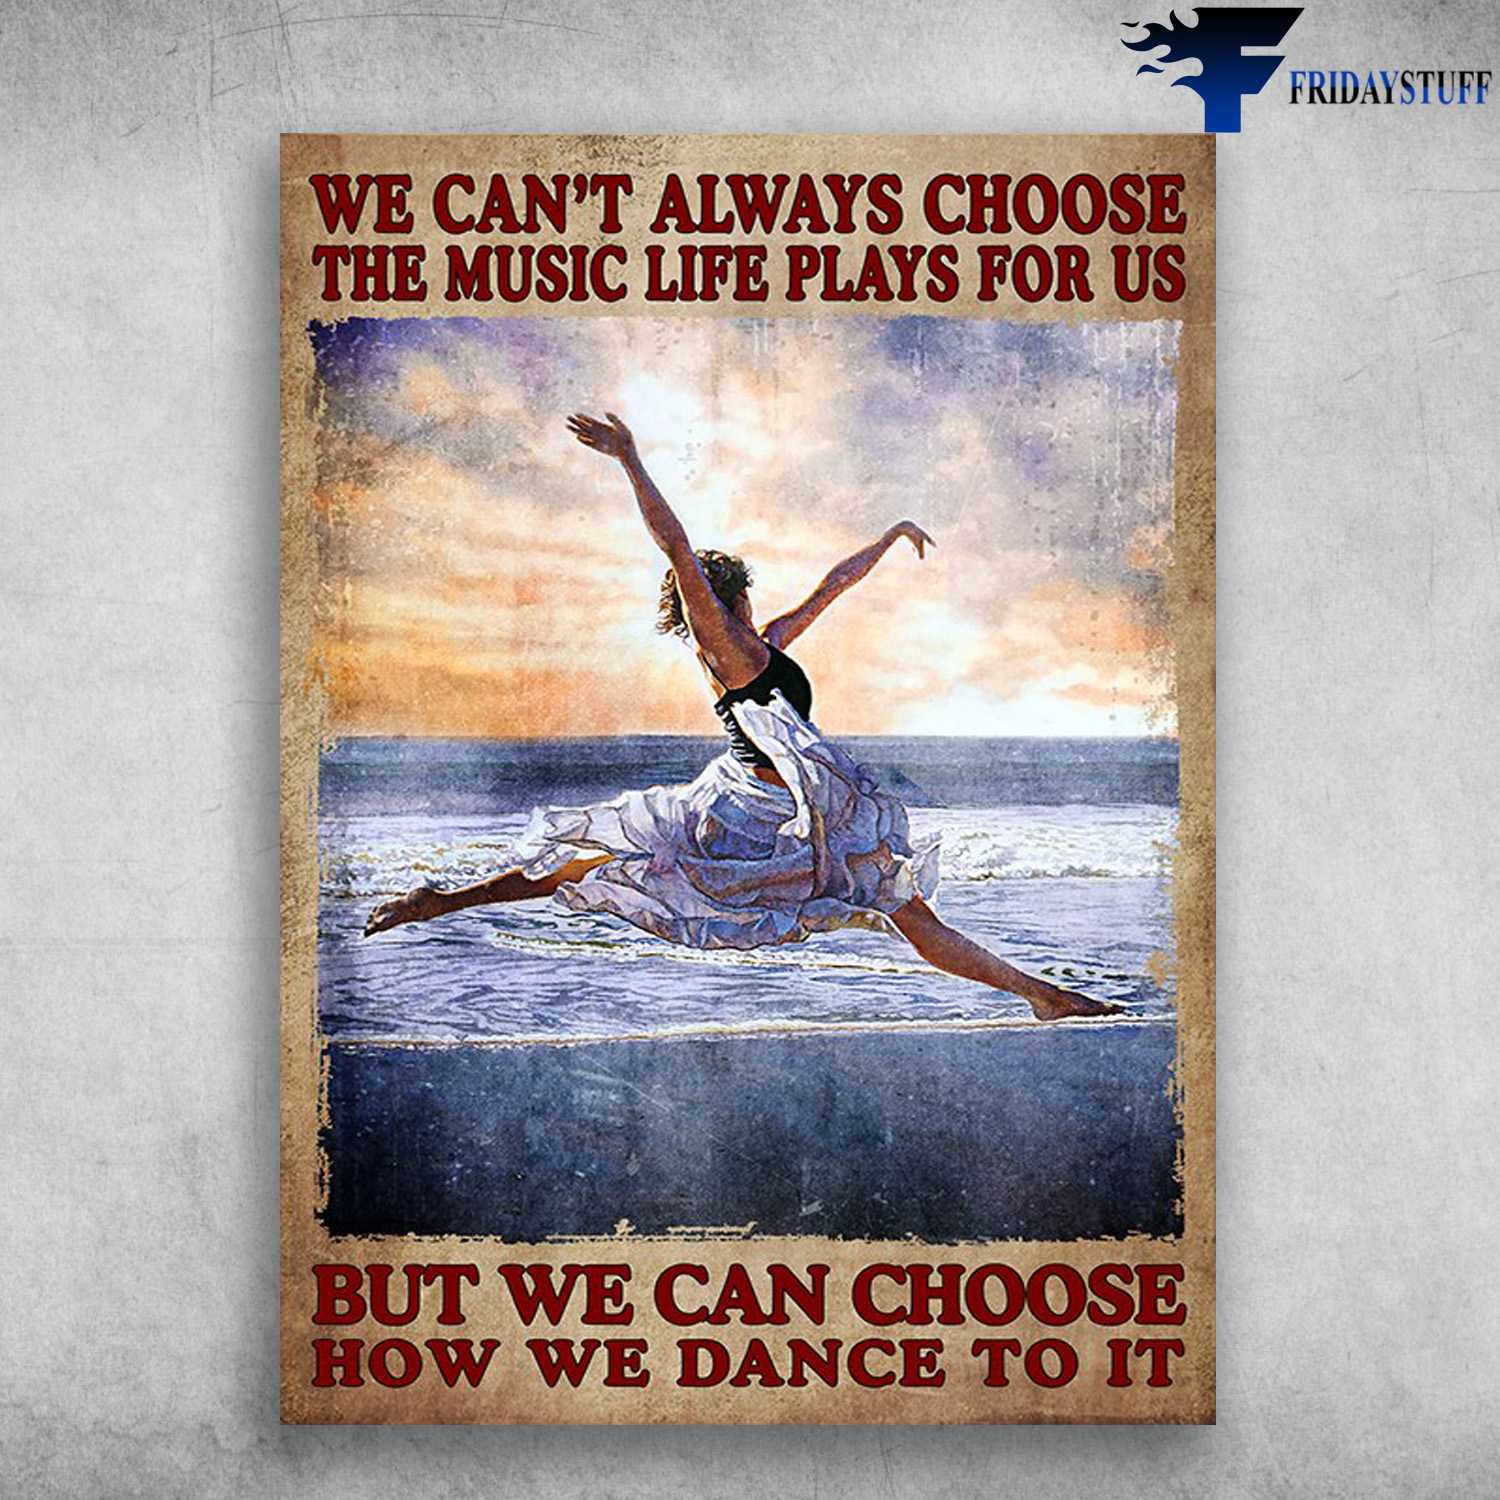 Dancing On Beach, Music And Dance - We Can't Always Choose, The Music Life Plays For Us, But We Can Choose, How We Dance To It